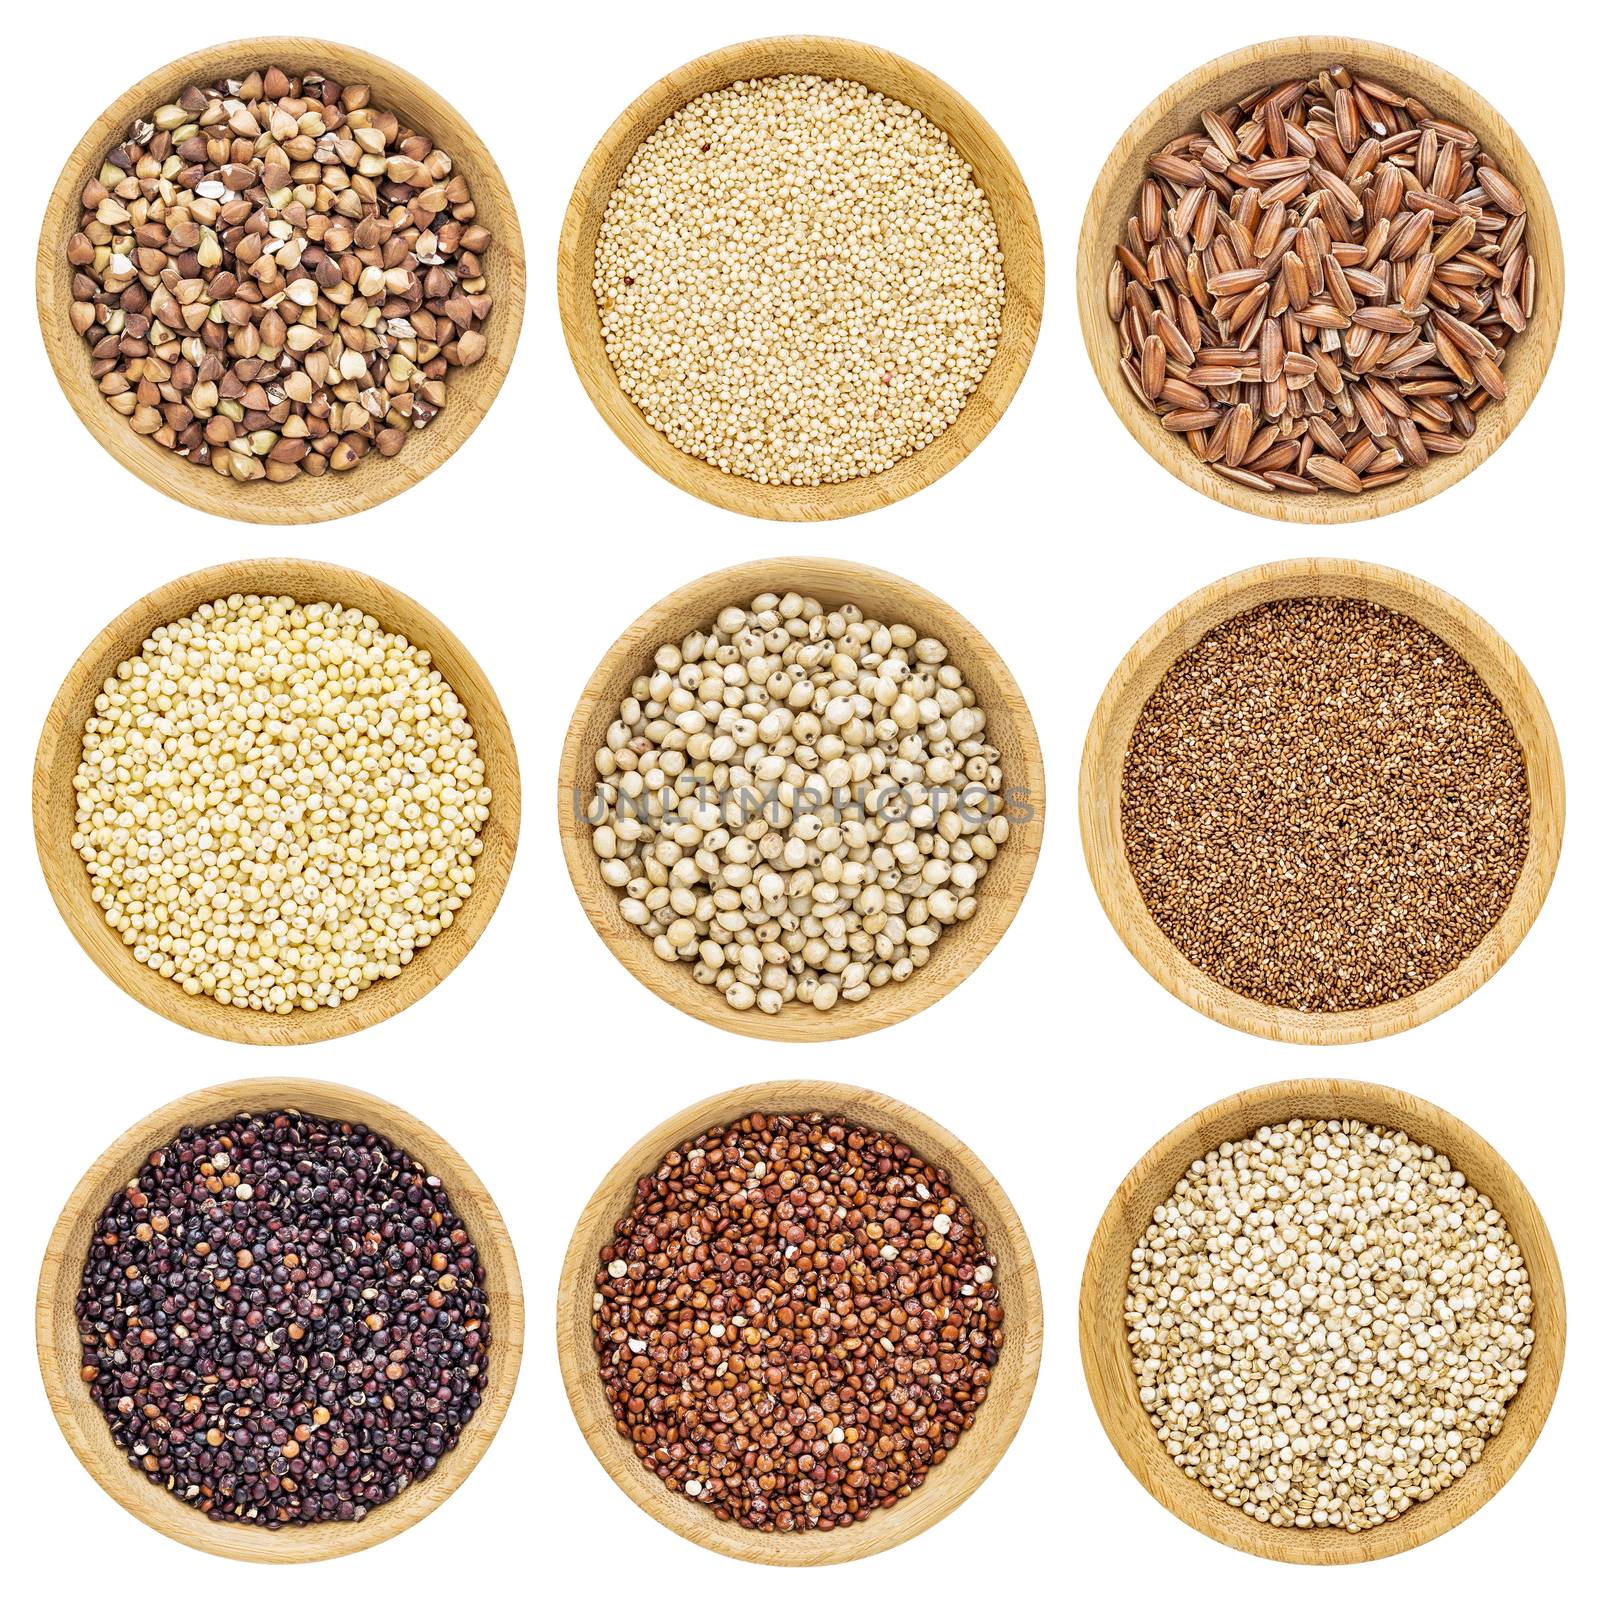 gluten free grains  - buckwheat, amaranth, brown rice, millet, sorghum, teff, black, red and white quinoa - isolated wooden bowls